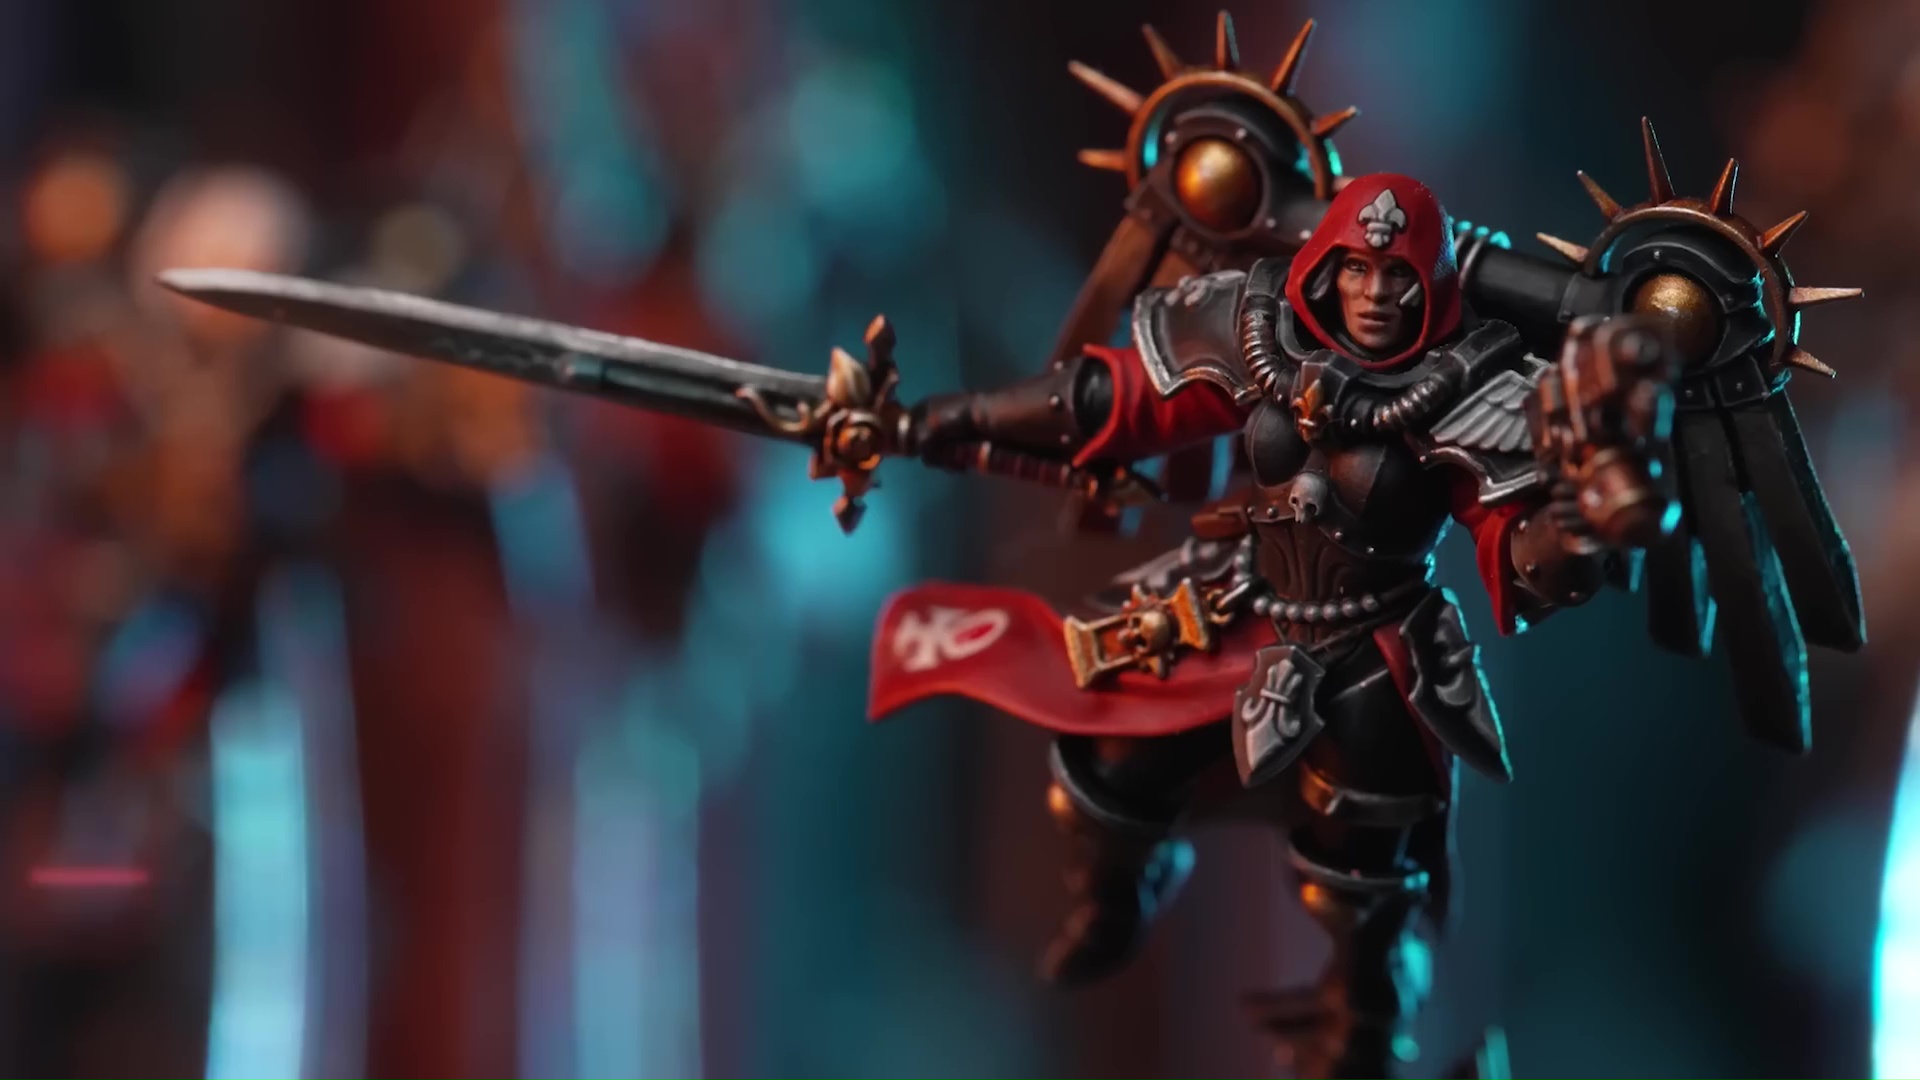 An Adepta Sororitas in red and black livery wearing a jump back and wielding a power sword.